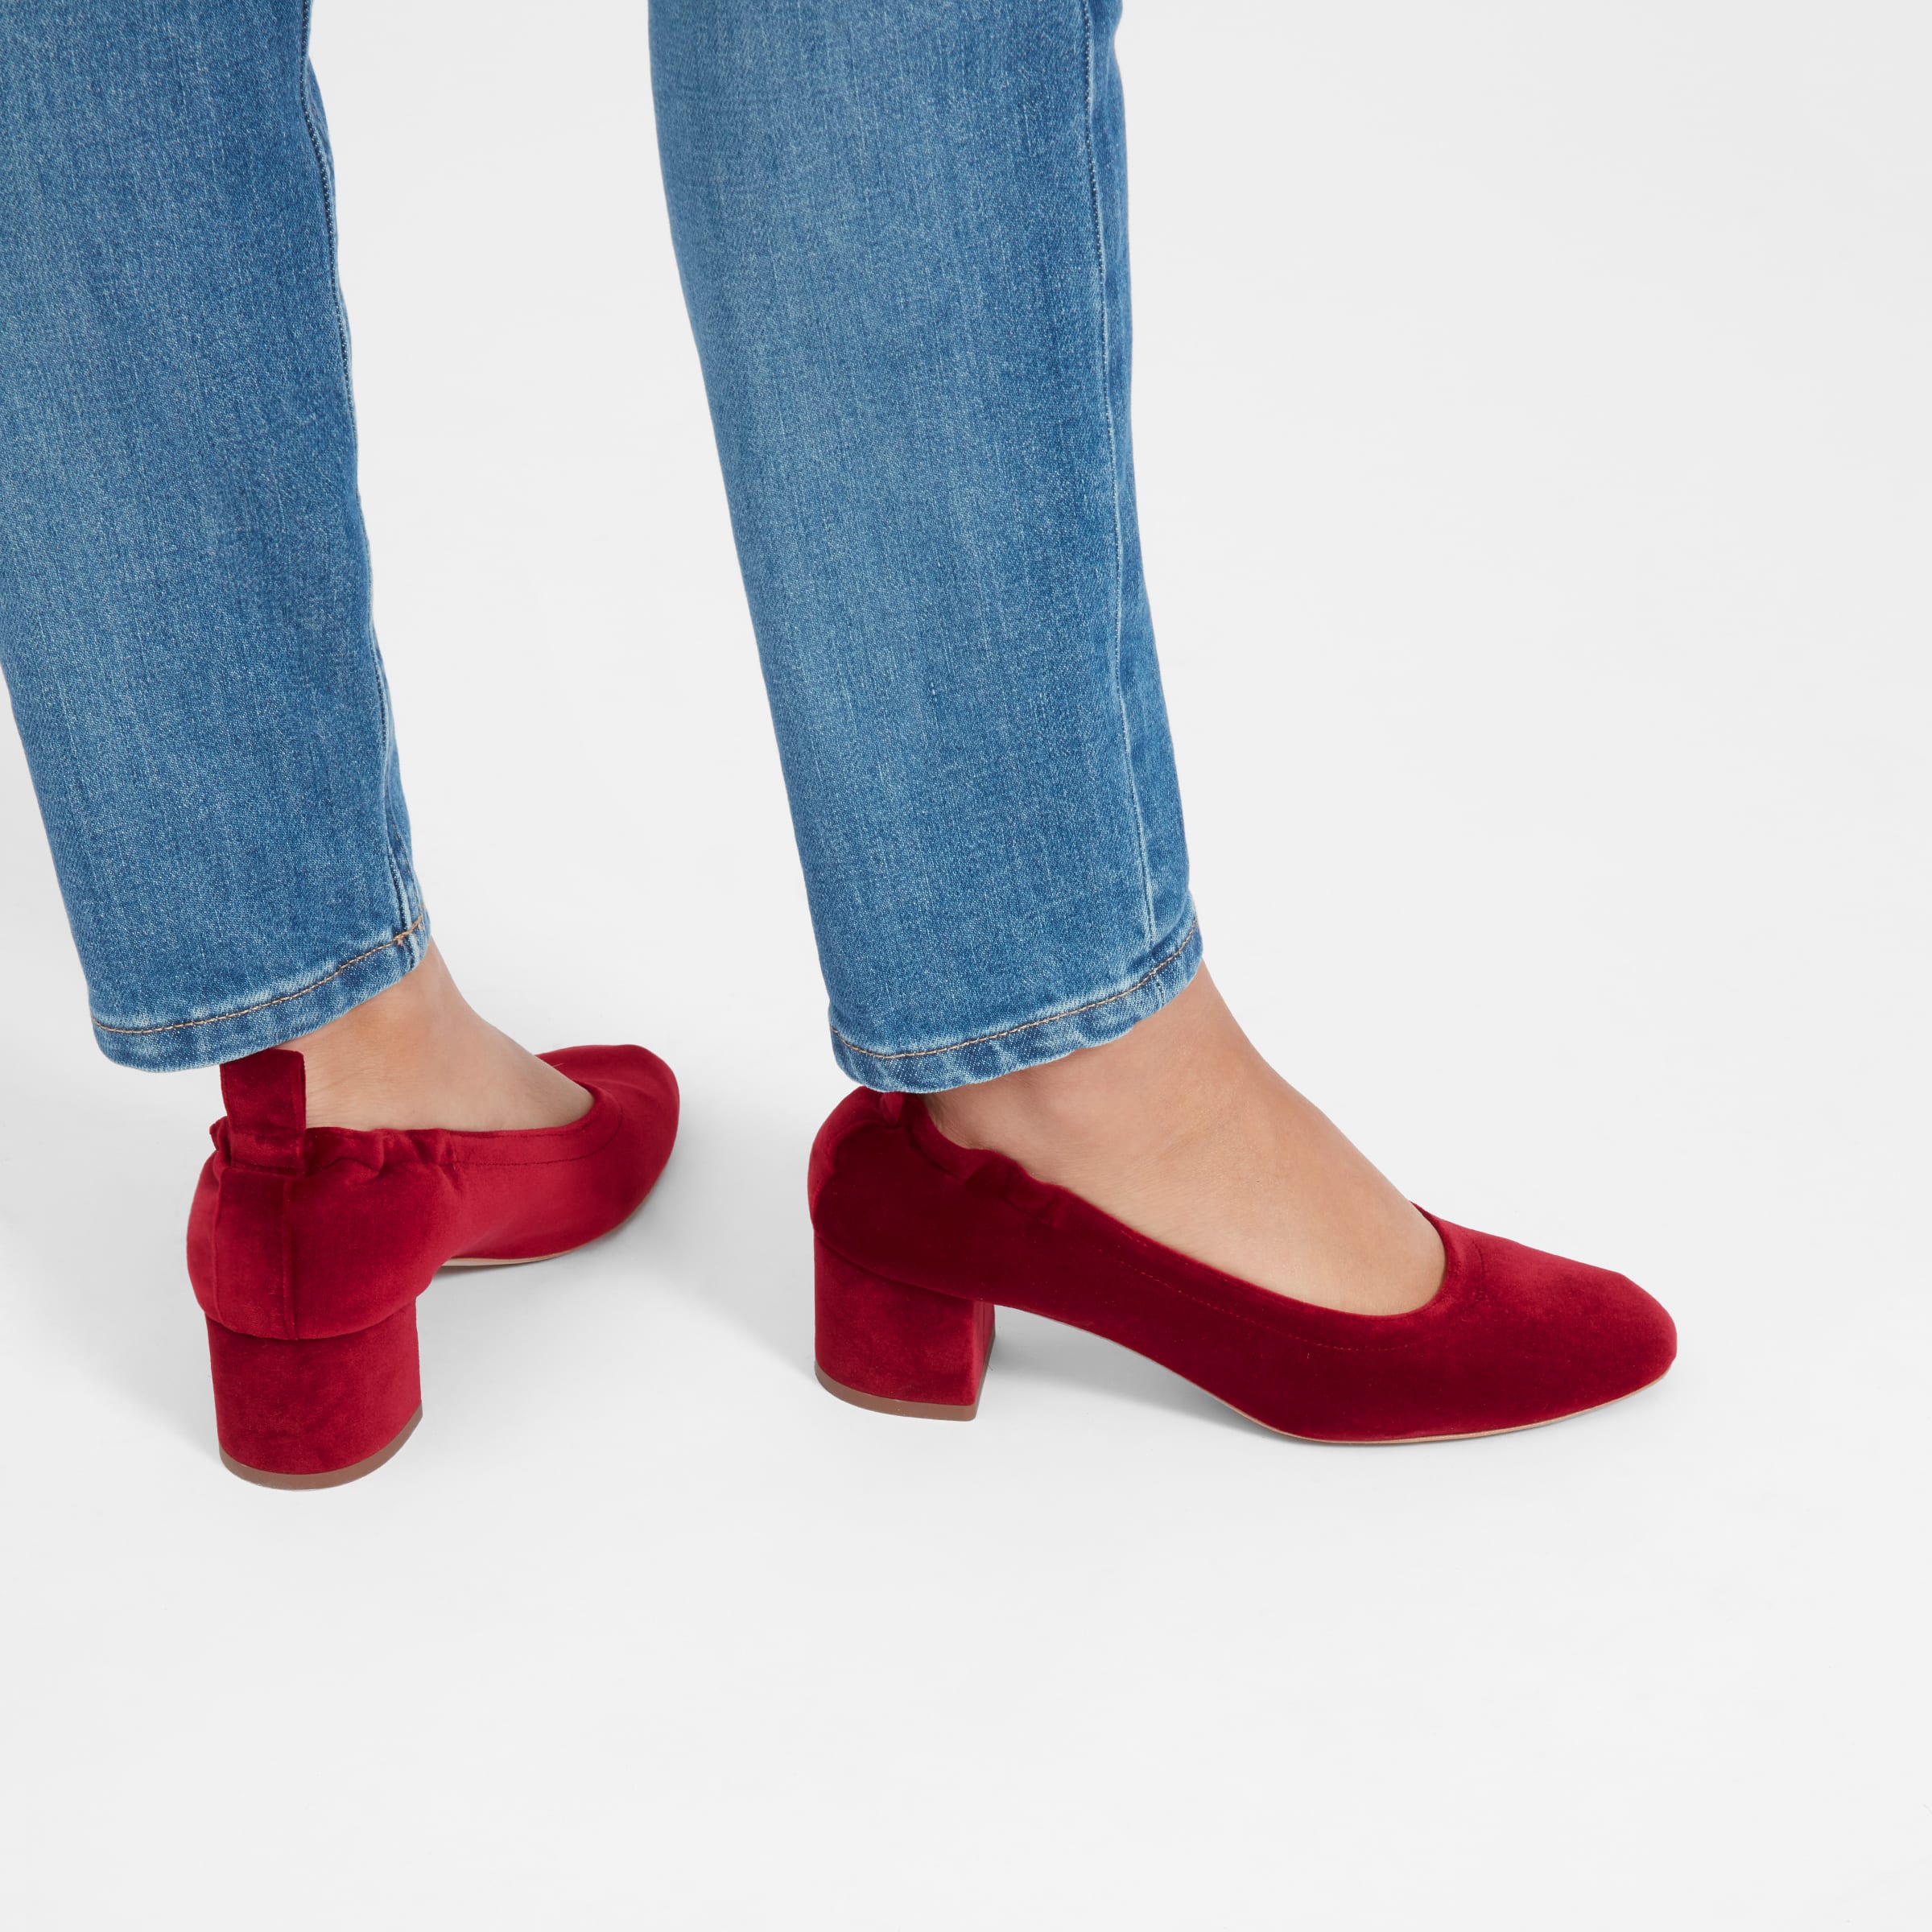 everlane red suede day heel